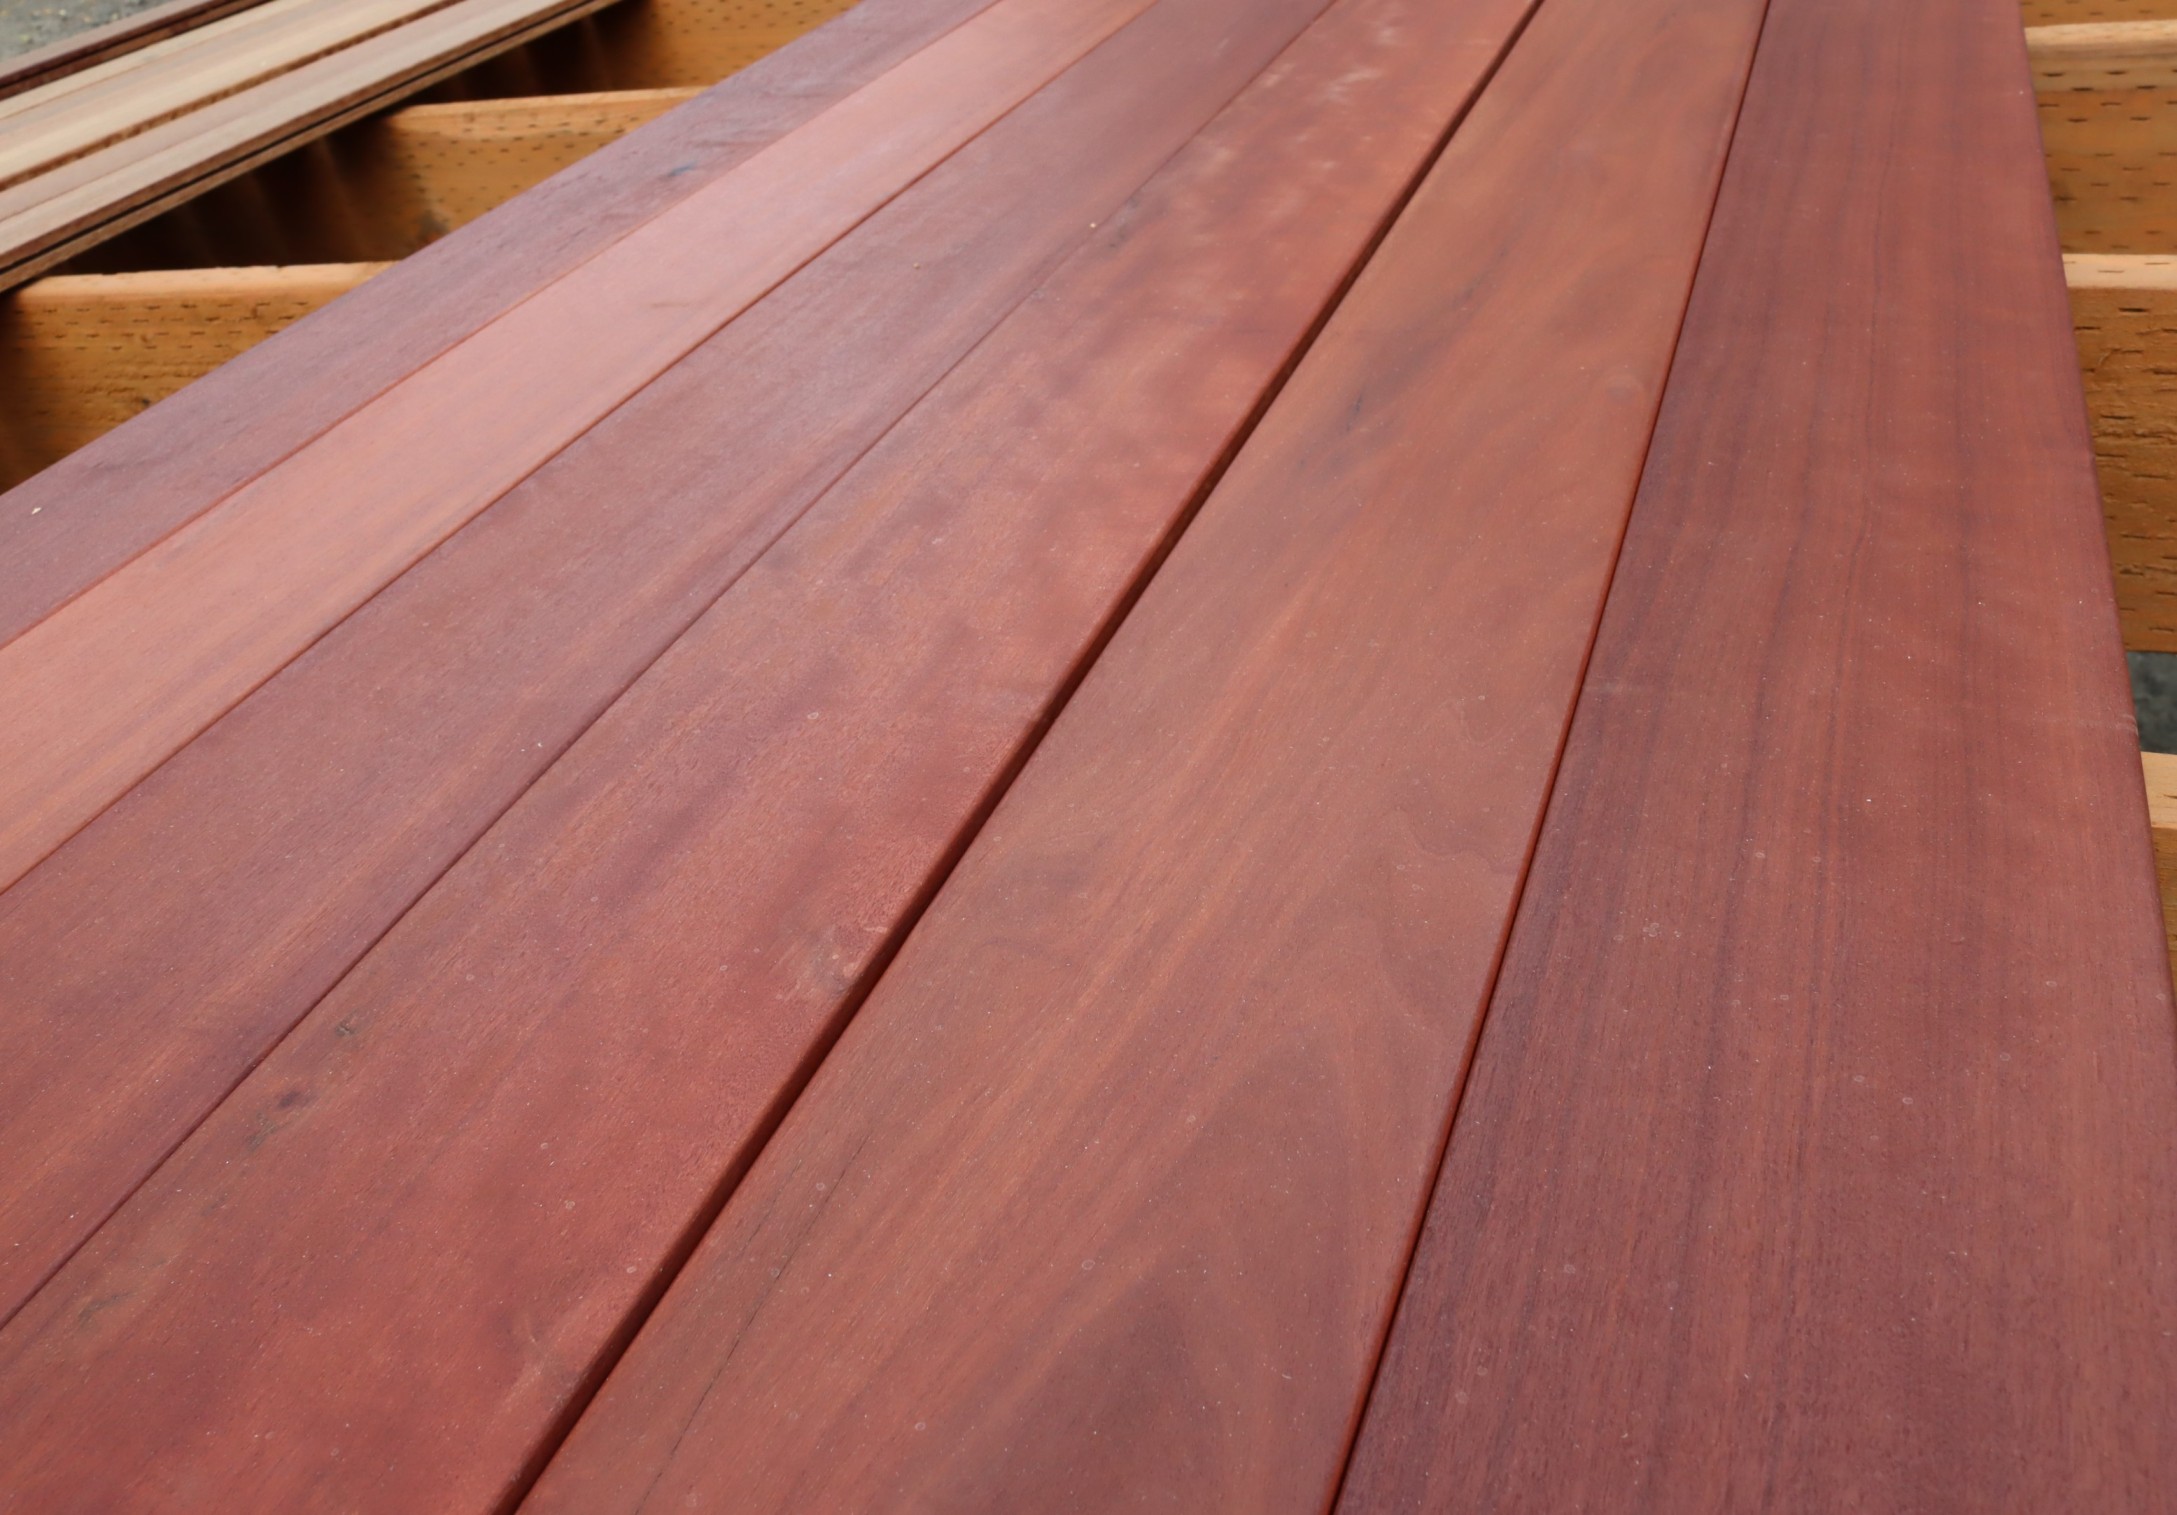 Nova USA Wood Products Adds South Pacific Redwood to Exotic Hardwood Decking Line